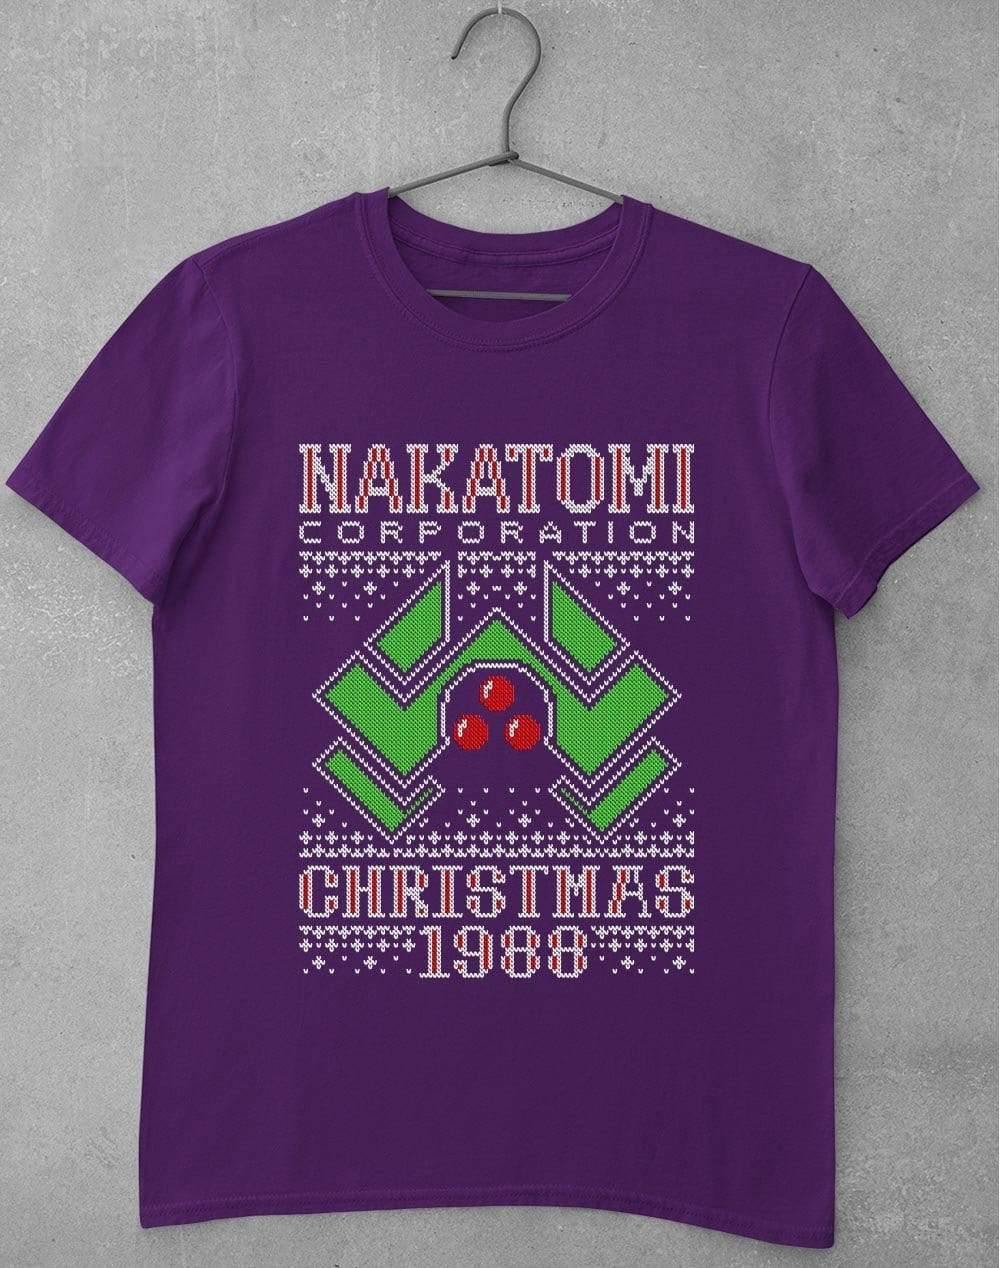 Nakatomi Christmas 1988 Knitted-Look T-Shirt S / Purple  - Off World Tees